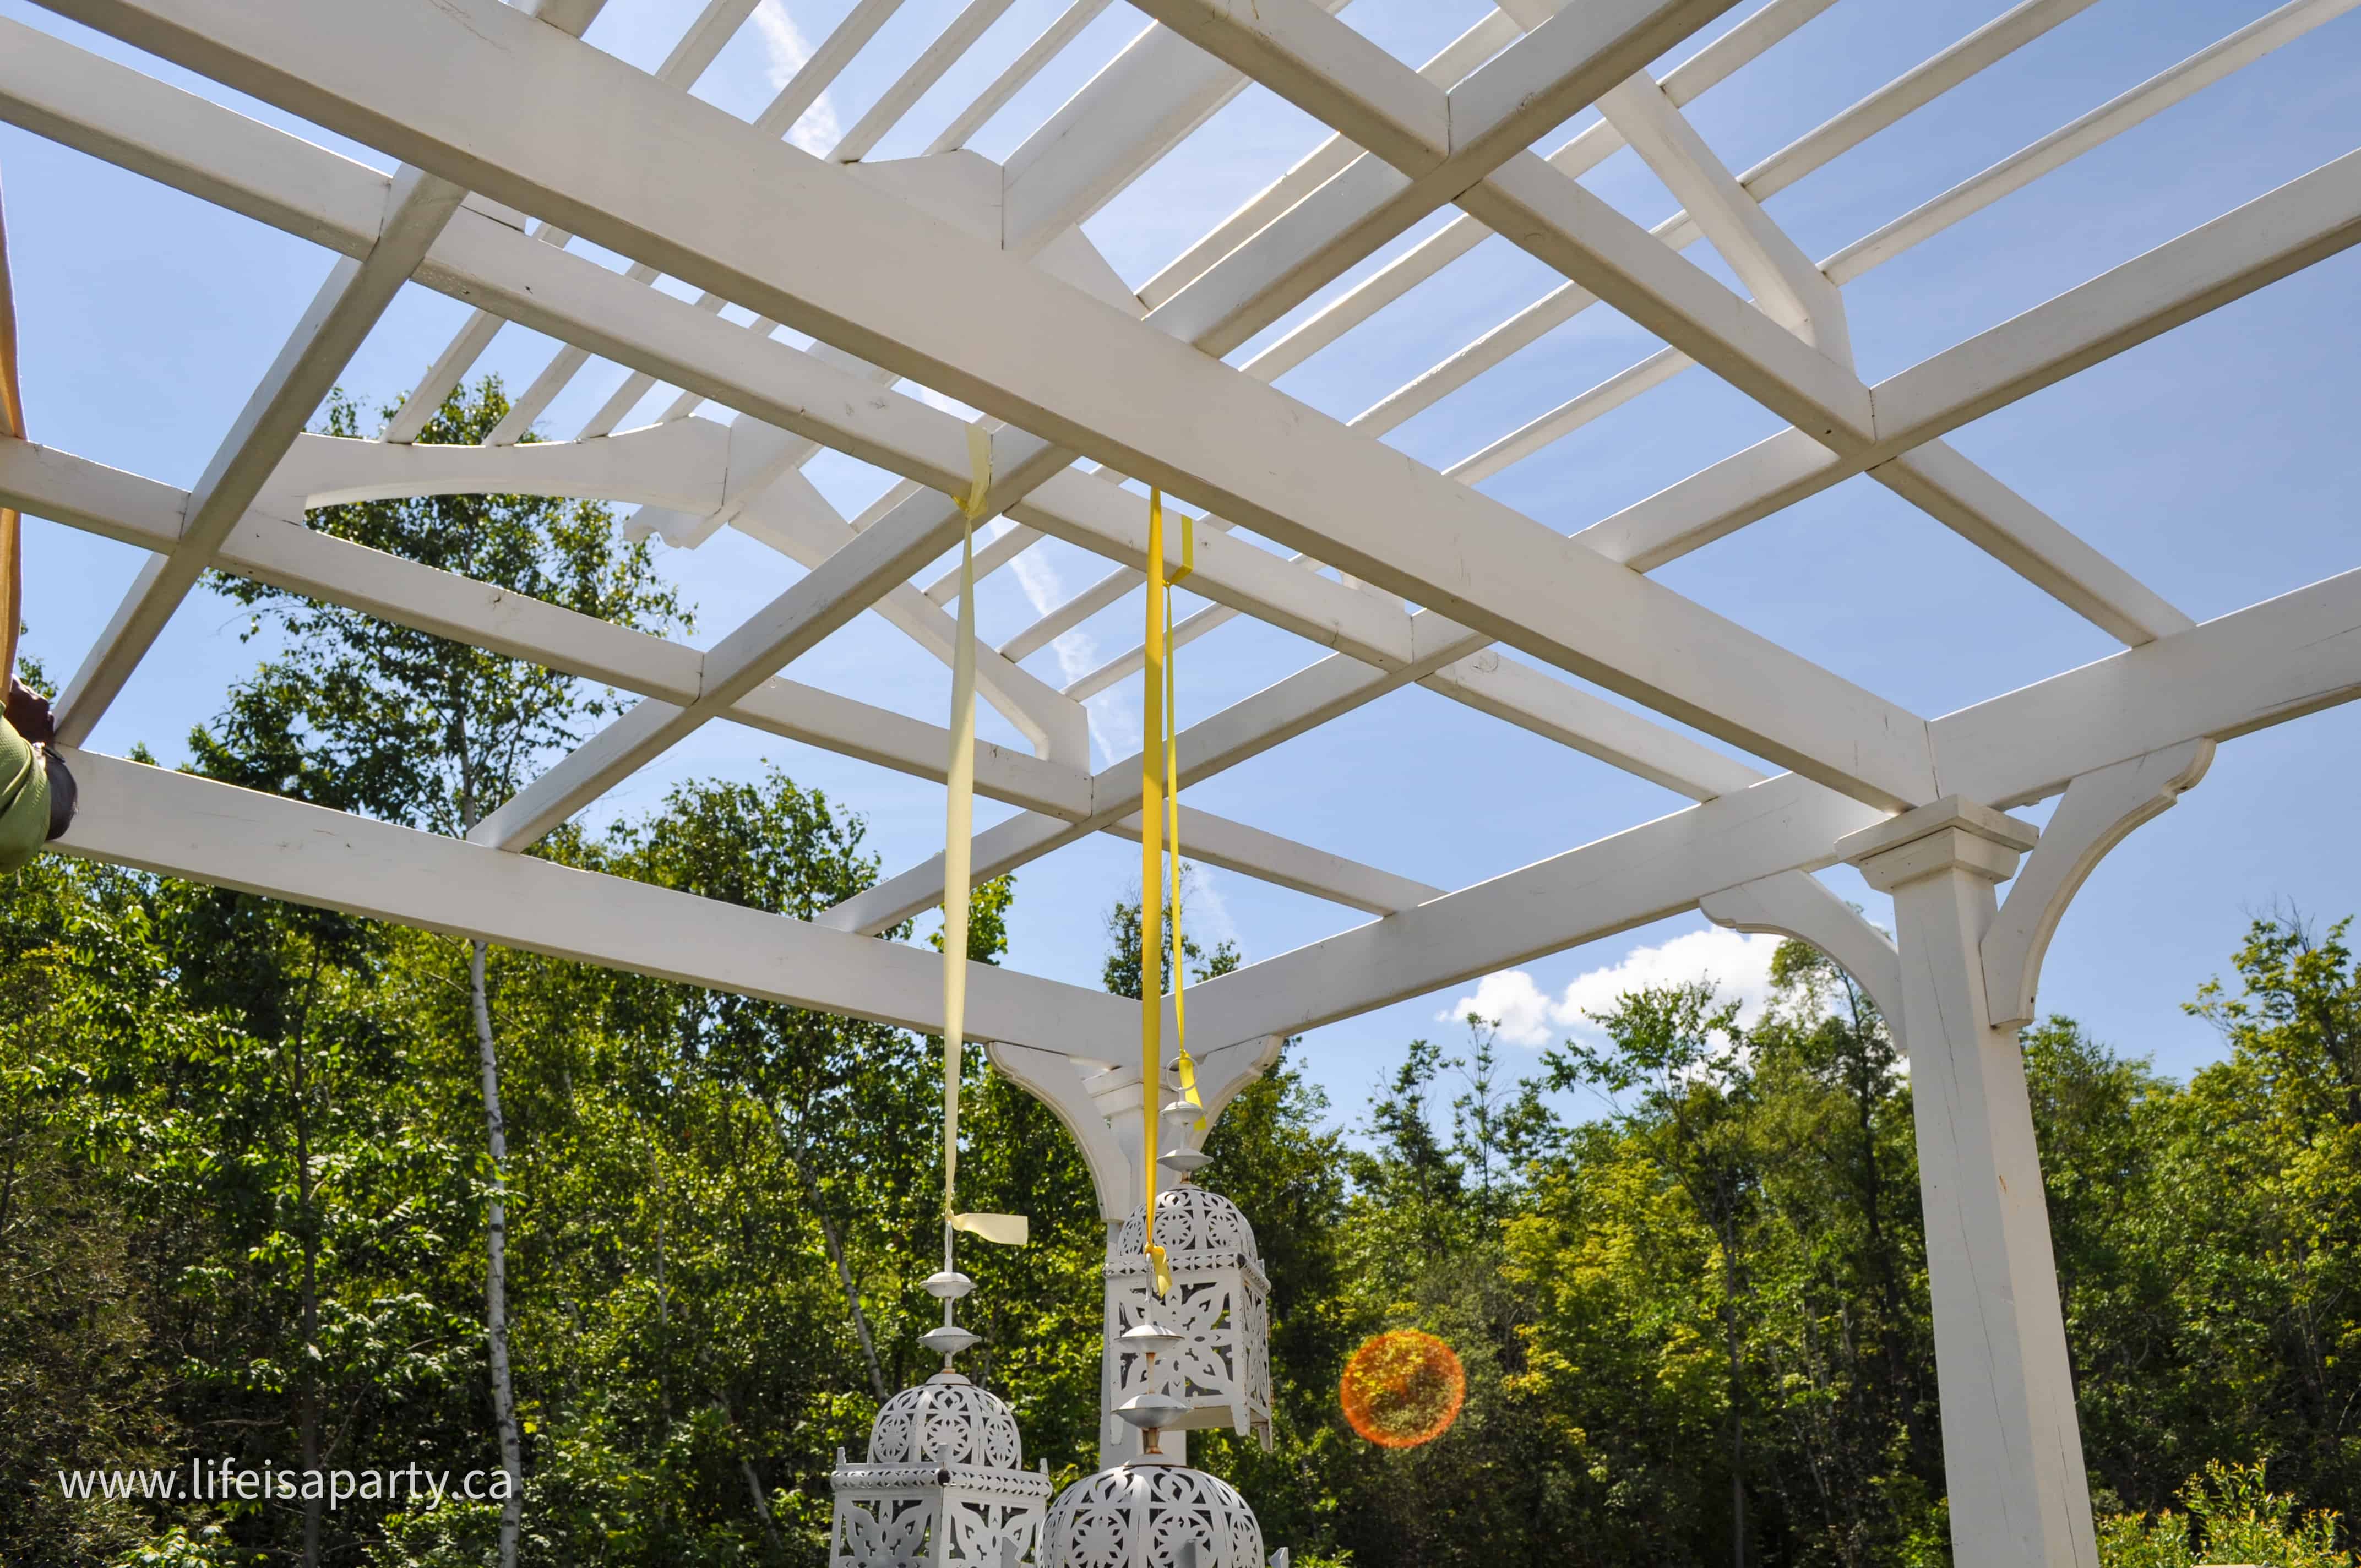 DIY Pergola Shade Cover: create shade under your pergola with these DIY fabric covers. These inexpensive covers are made from drop cloths and brass grommets and woven through the top of the pergola.